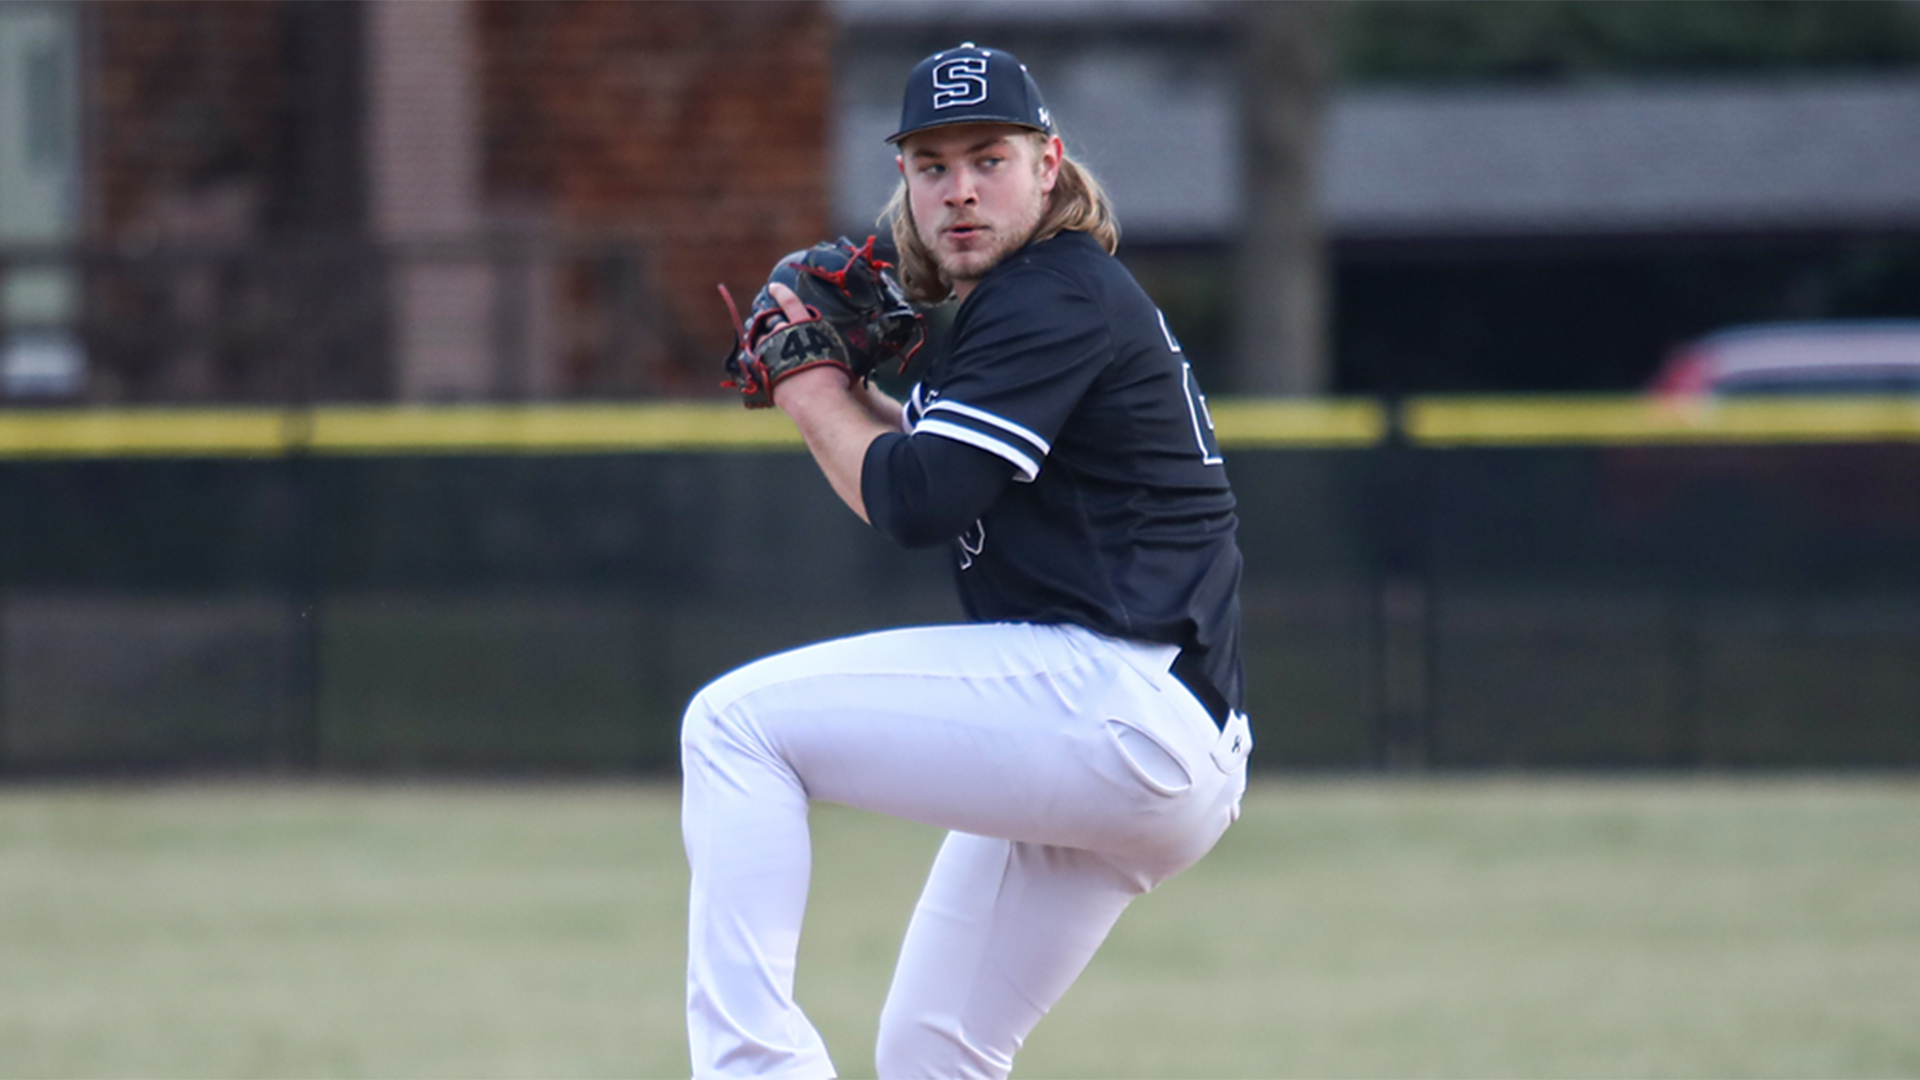 Zach Camp, Swarthmore, Pitcher of the Week